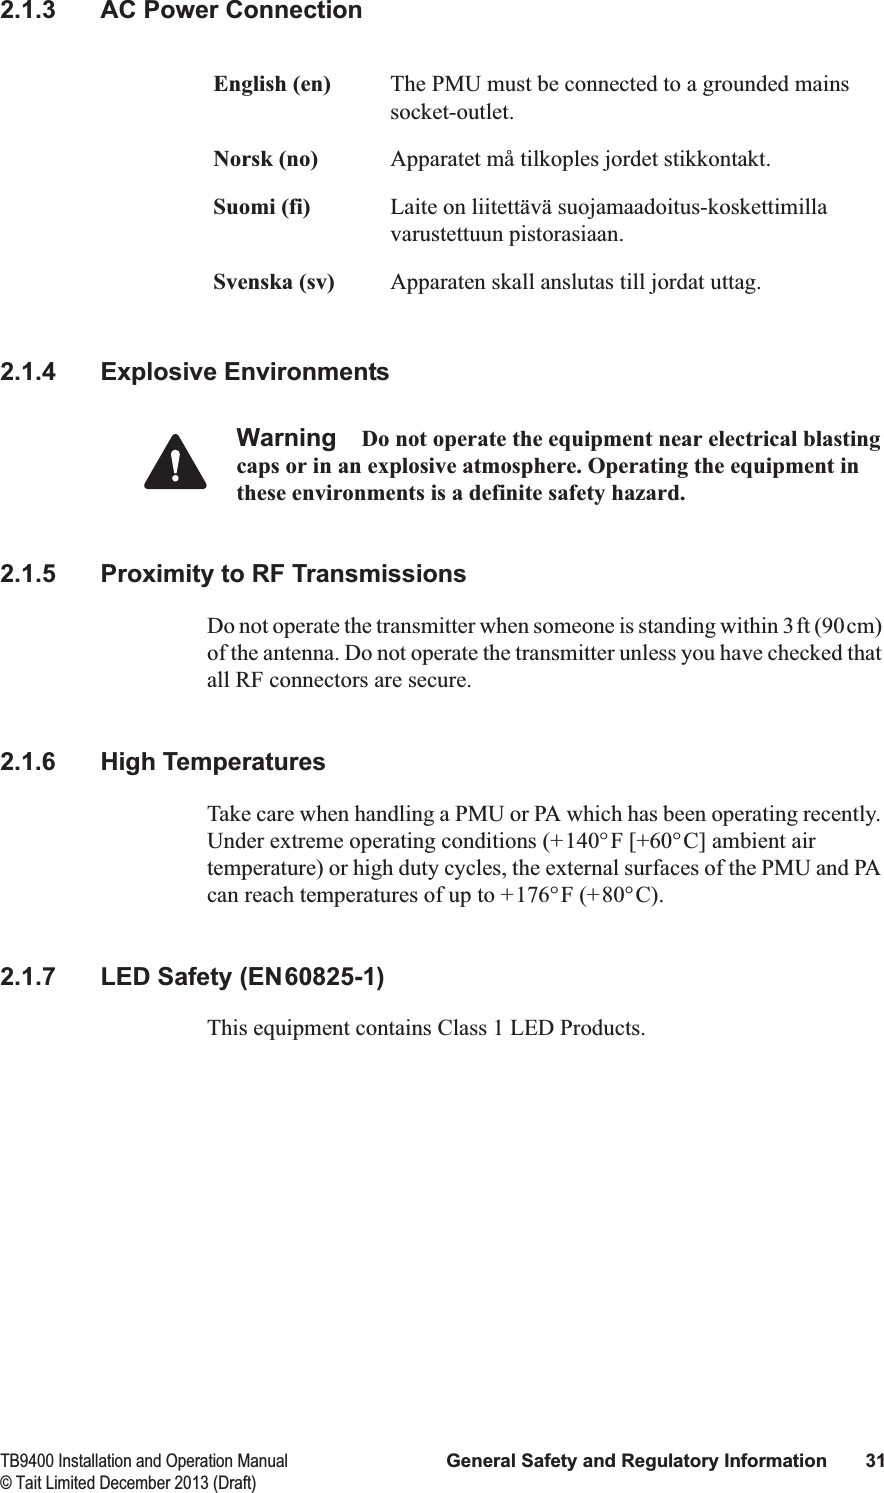  TB9400 Installation and Operation Manual General Safety and Regulatory Information 31© Tait Limited December 2013 (Draft)2.1.3 AC Power Connection2.1.4 Explosive EnvironmentsWarning Do not operate the equipment near electrical blasting caps or in an explosive atmosphere. Operating the equipment in these environments is a definite safety hazard.2.1.5 Proximity to RF TransmissionsDo not operate the transmitter when someone is standing within 3ft (90cm) of the antenna. Do not operate the transmitter unless you have checked that all RF connectors are secure.2.1.6 High TemperaturesTake care when handling a PMU or PA which has been operating recently. Under extreme operating conditions (+140°F [+60°C] ambient air temperature) or high duty cycles, the external surfaces of the PMU and PA can reach temperatures of up to +176°F (+80°C).2.1.7 LED Safety (EN60825-1)This equipment contains Class 1 LED Products.English (en) The PMU must be connected to a grounded mains socket-outlet.Norsk (no) Apparatet må tilkoples jordet stikkontakt.Suomi (fi) Laite on liitettävä suojamaadoitus-koskettimilla varustettuun pistorasiaan.Svenska (sv) Apparaten skall anslutas till jordat uttag.